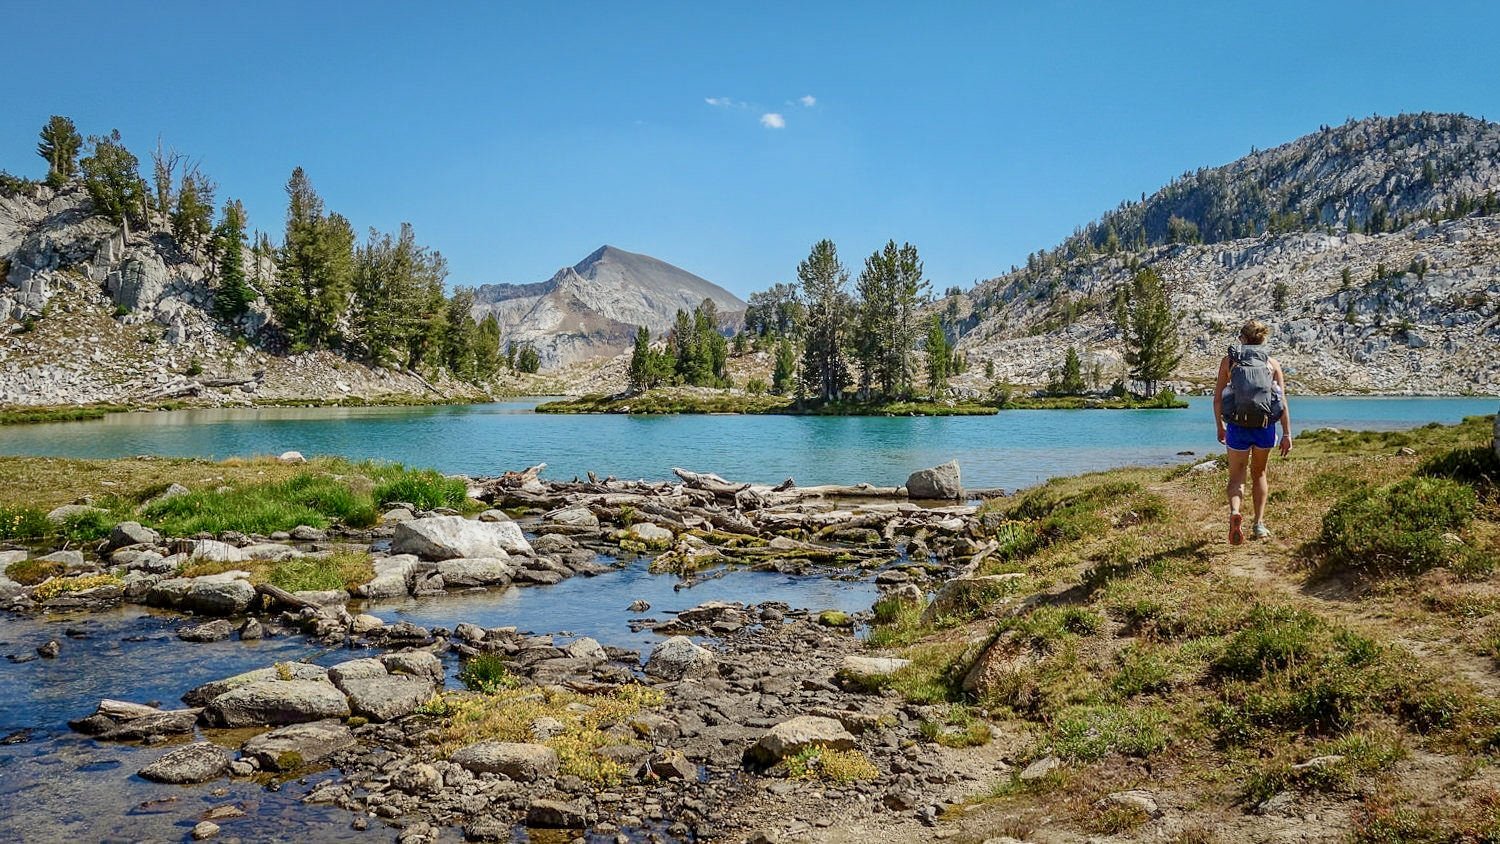 A backpacker hikes by the edge of a turquoise blue lake in the Wallowa mountains with a beautiful island in the middle